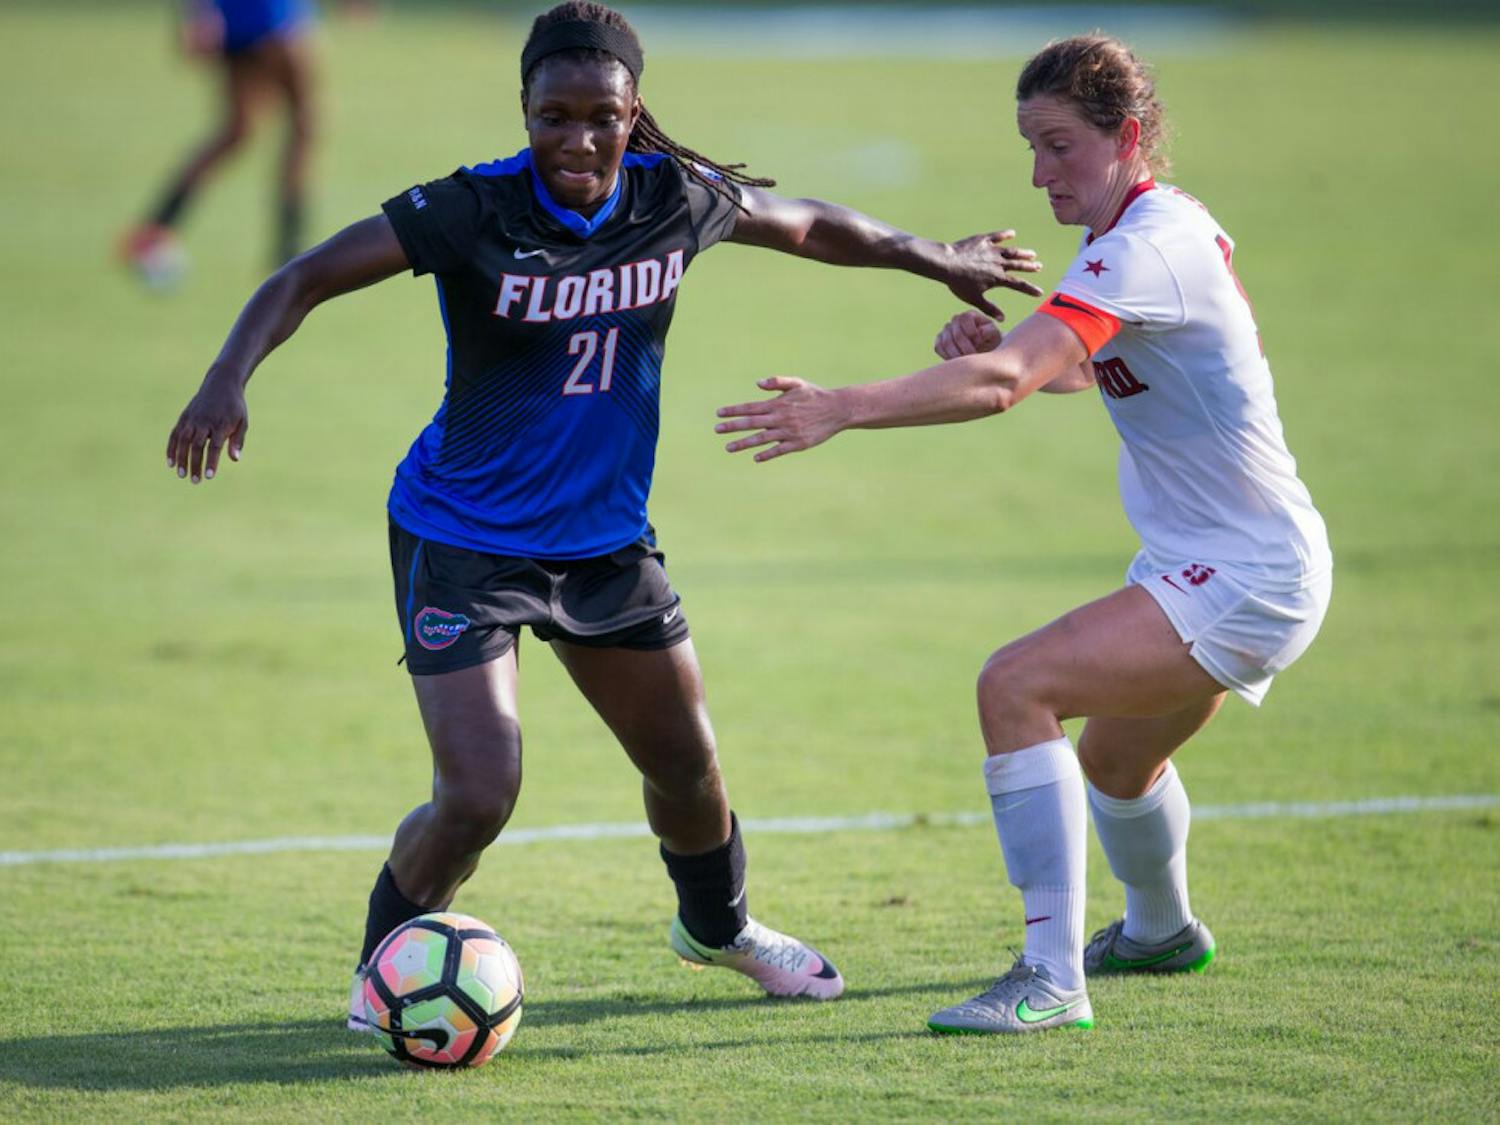 Deanne Rose holds off a defender during Florida's 3-2 win against Stanford on Aug. 25, 2017, at Donald R. Dizney Stadium (photo by Matt Stamey/courtesy of Florida).